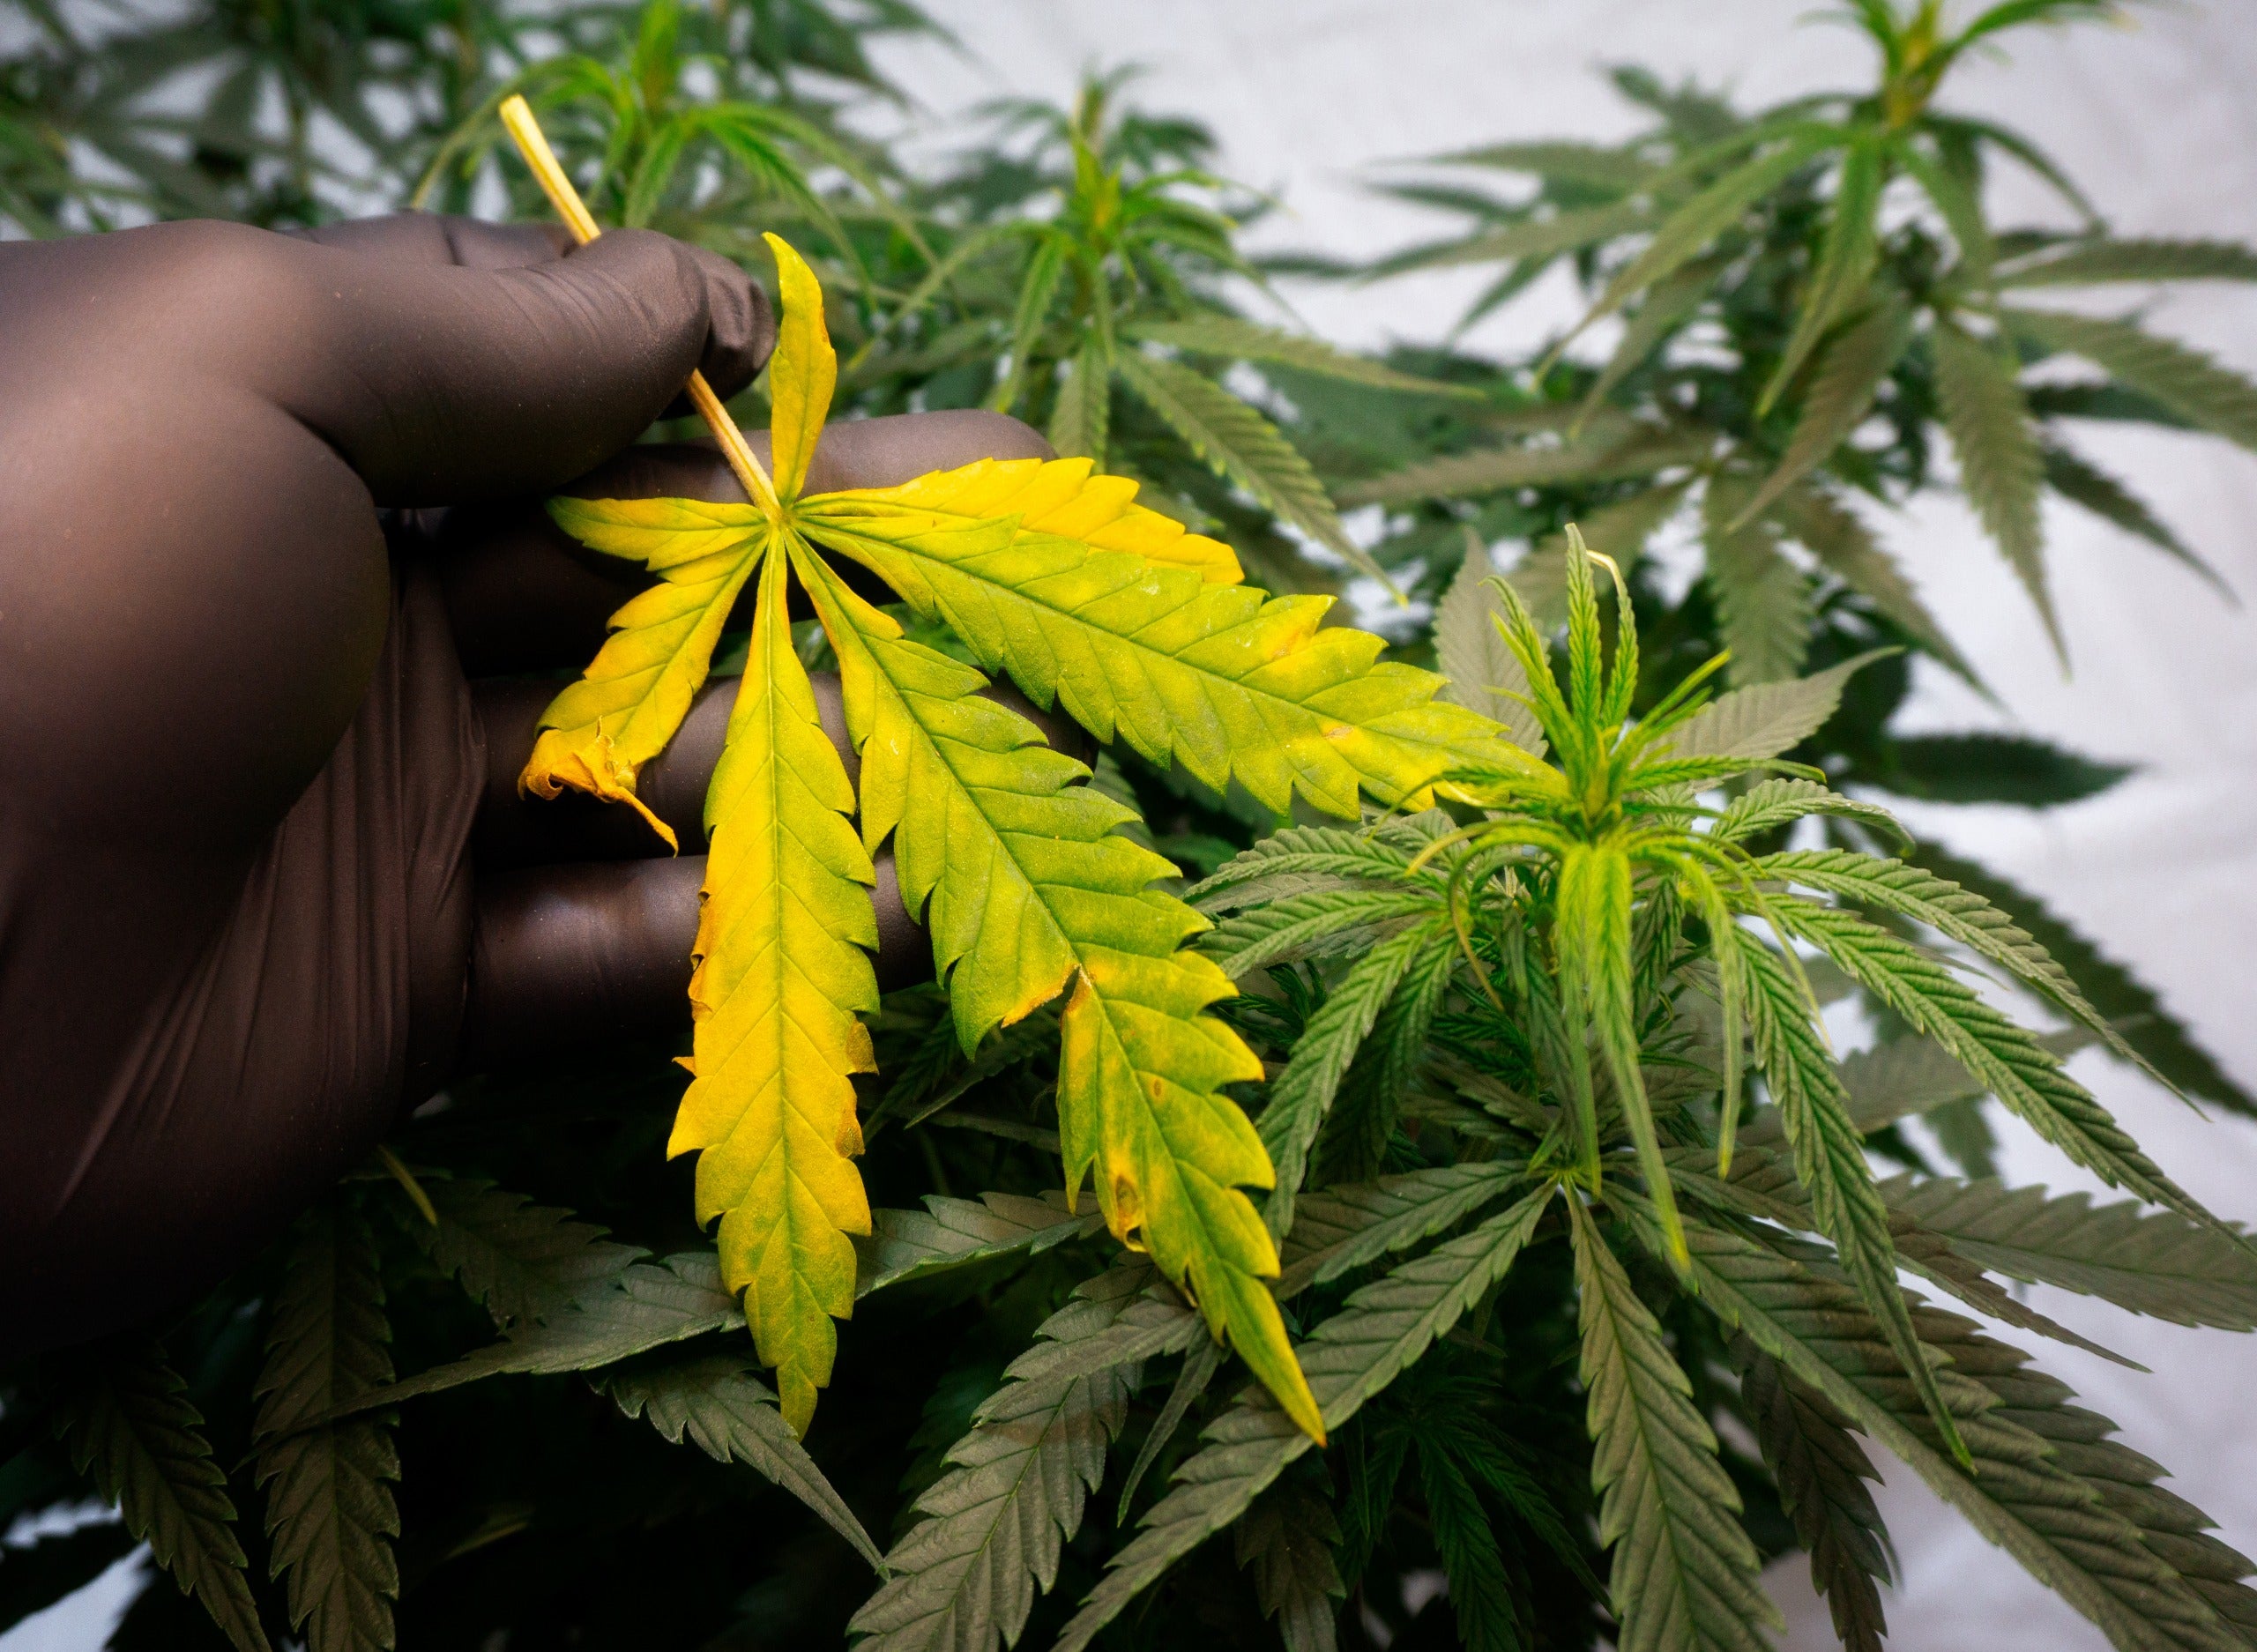 Learn How To Trim Weed And Improve Your Buds' Potency And Quality In A Snip  - Herbies